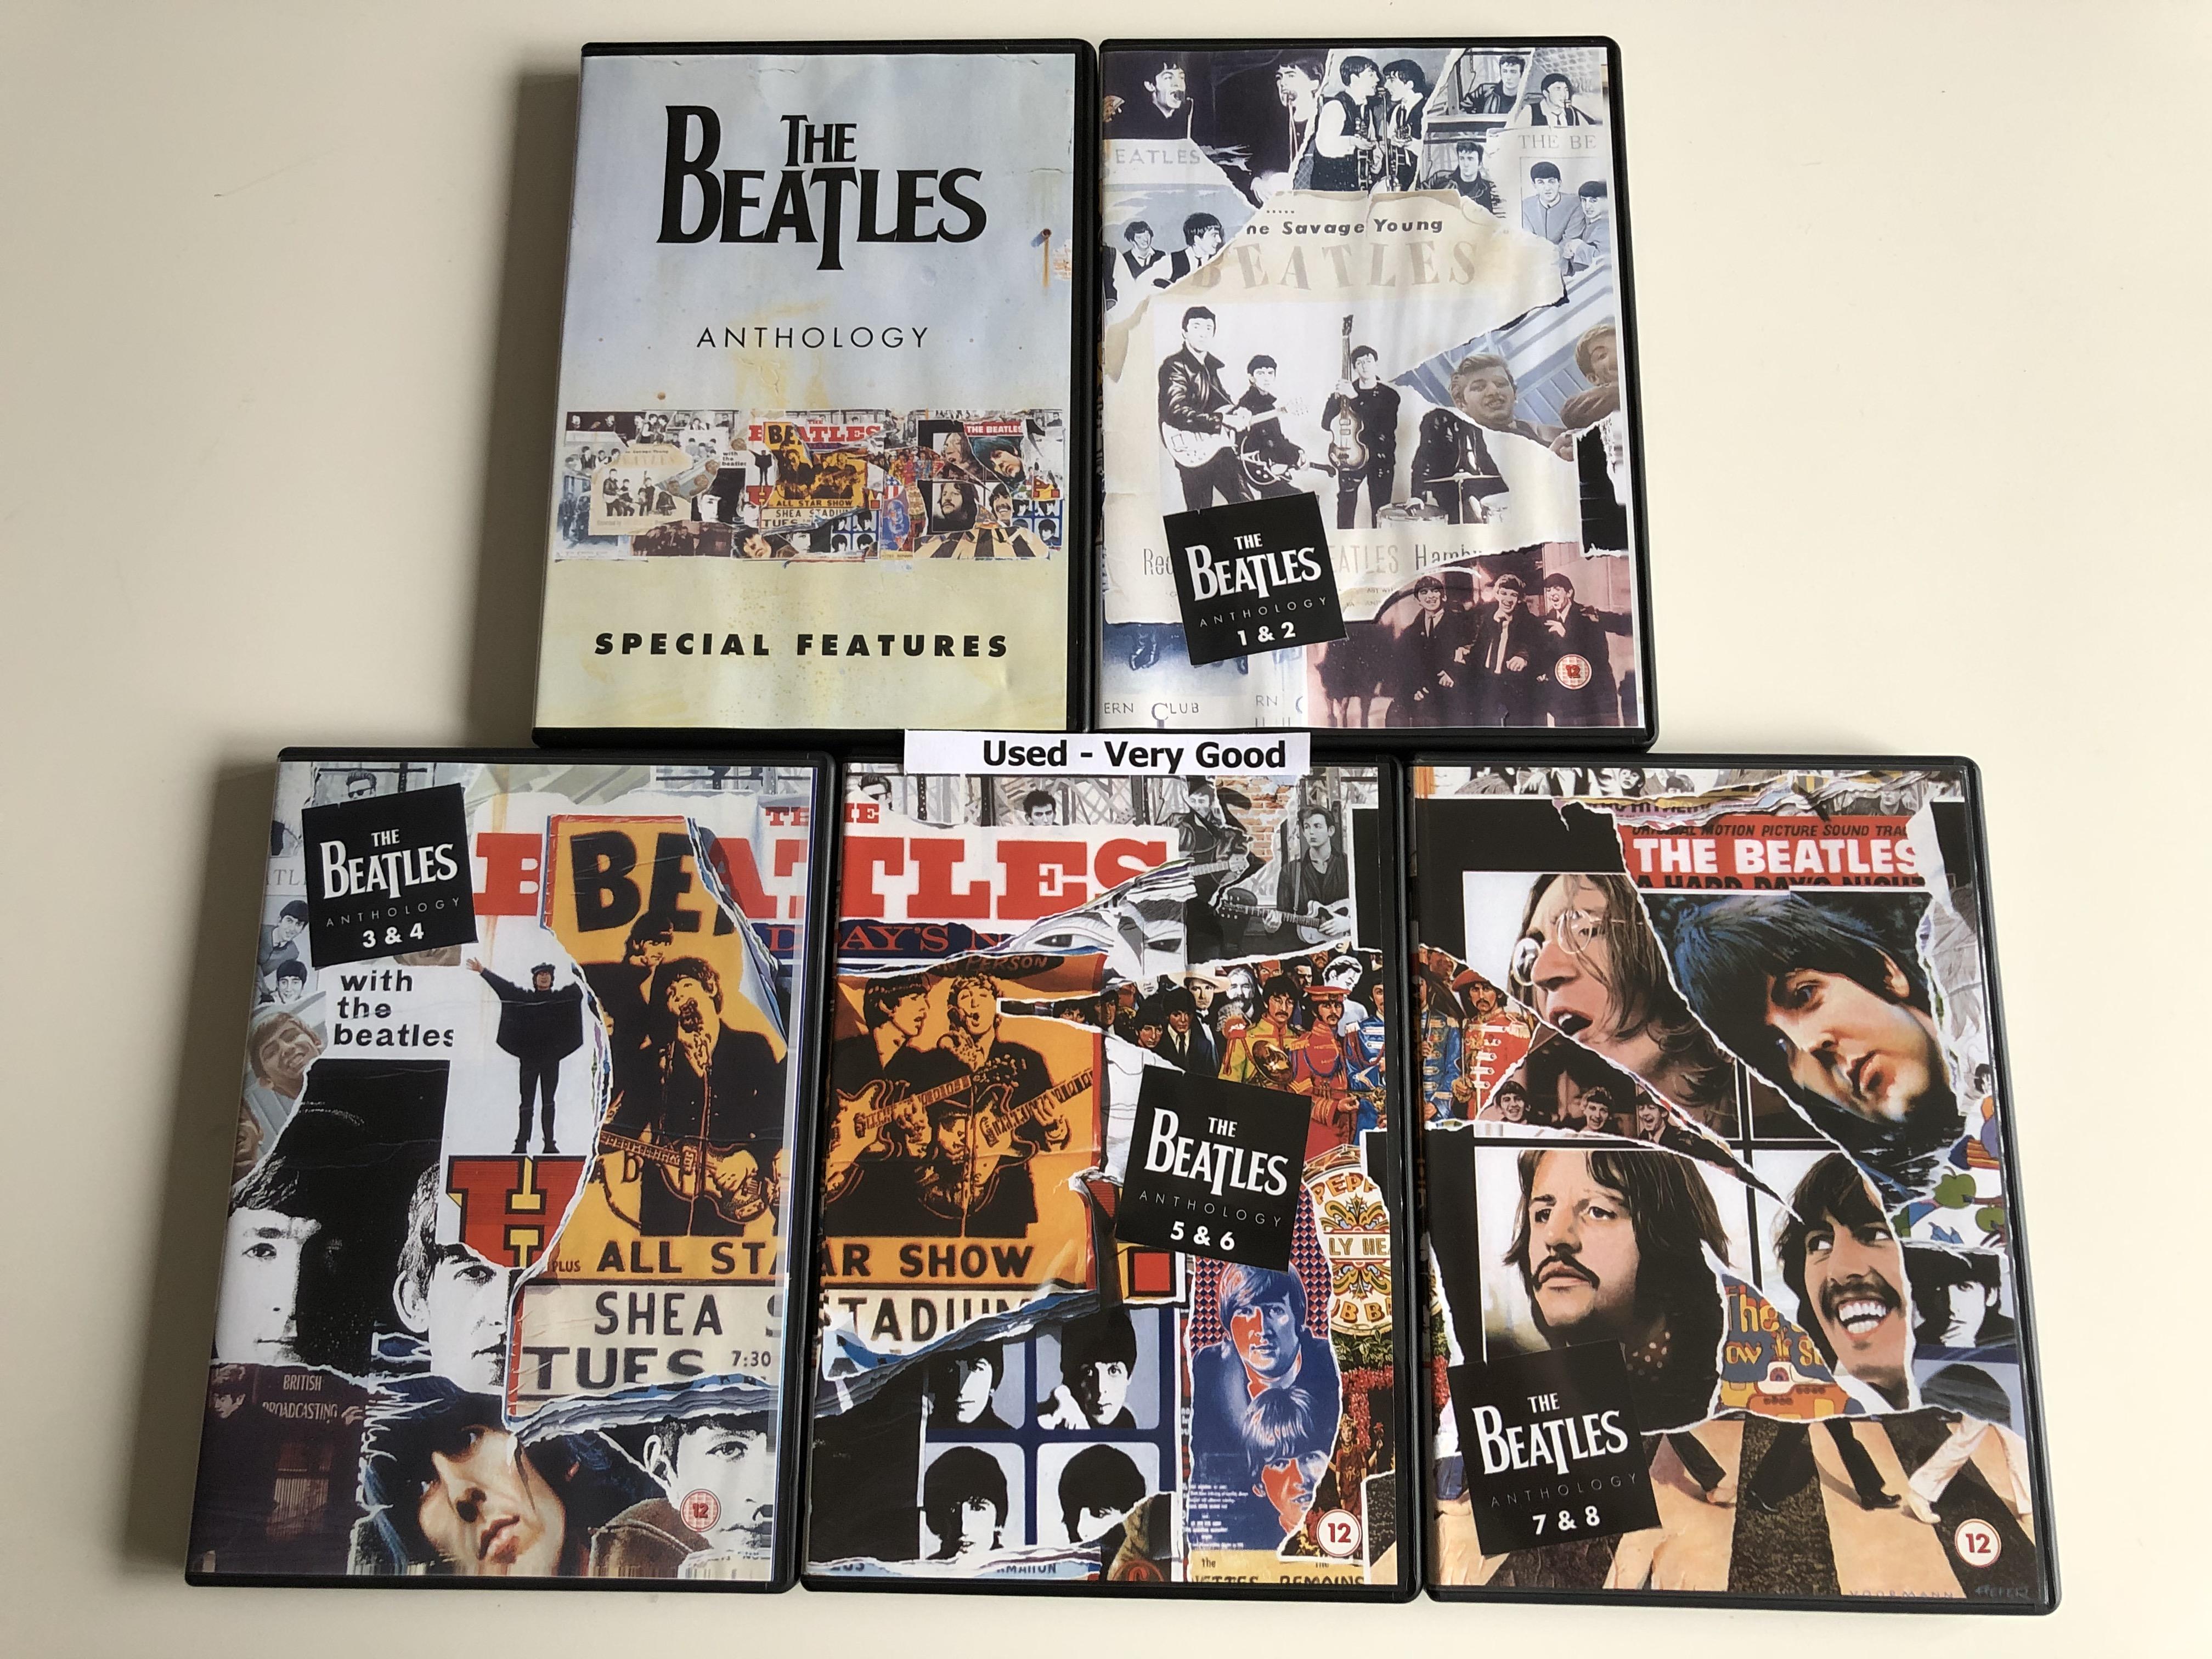 The Beatles Anthology Dvd Set 03 5 Discs 8 Episodes Documentary Series Directed By Geoff Wonfor Apple Records Bonus Special Features Dvd Bibleinmylanguage